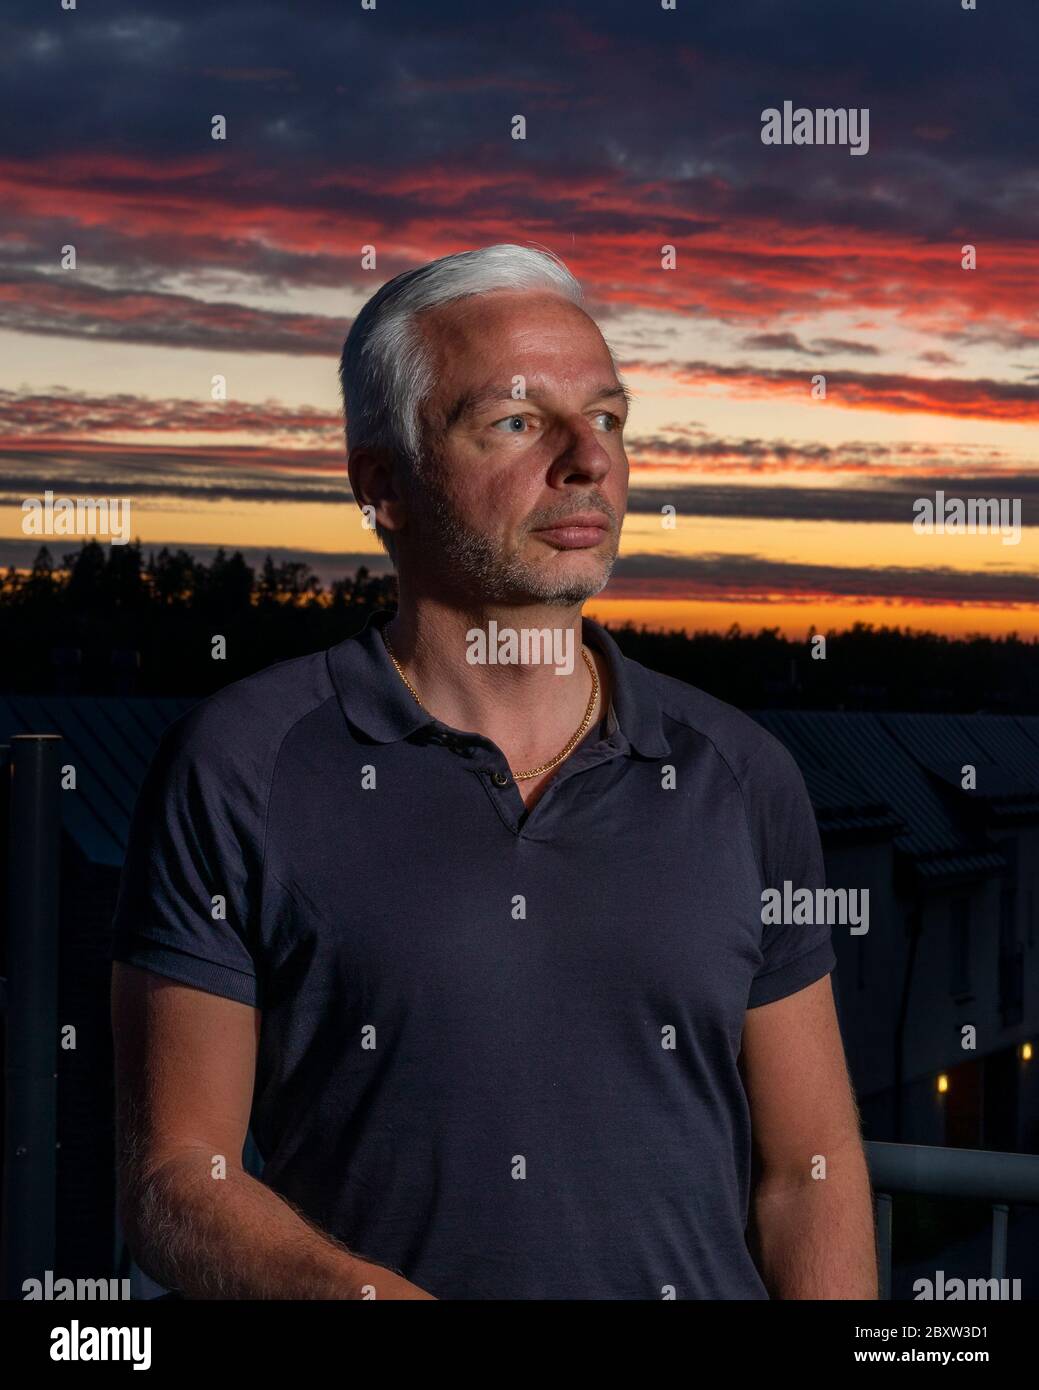 Dramatic one flash portrait of a man with sunset as background Stock Photo